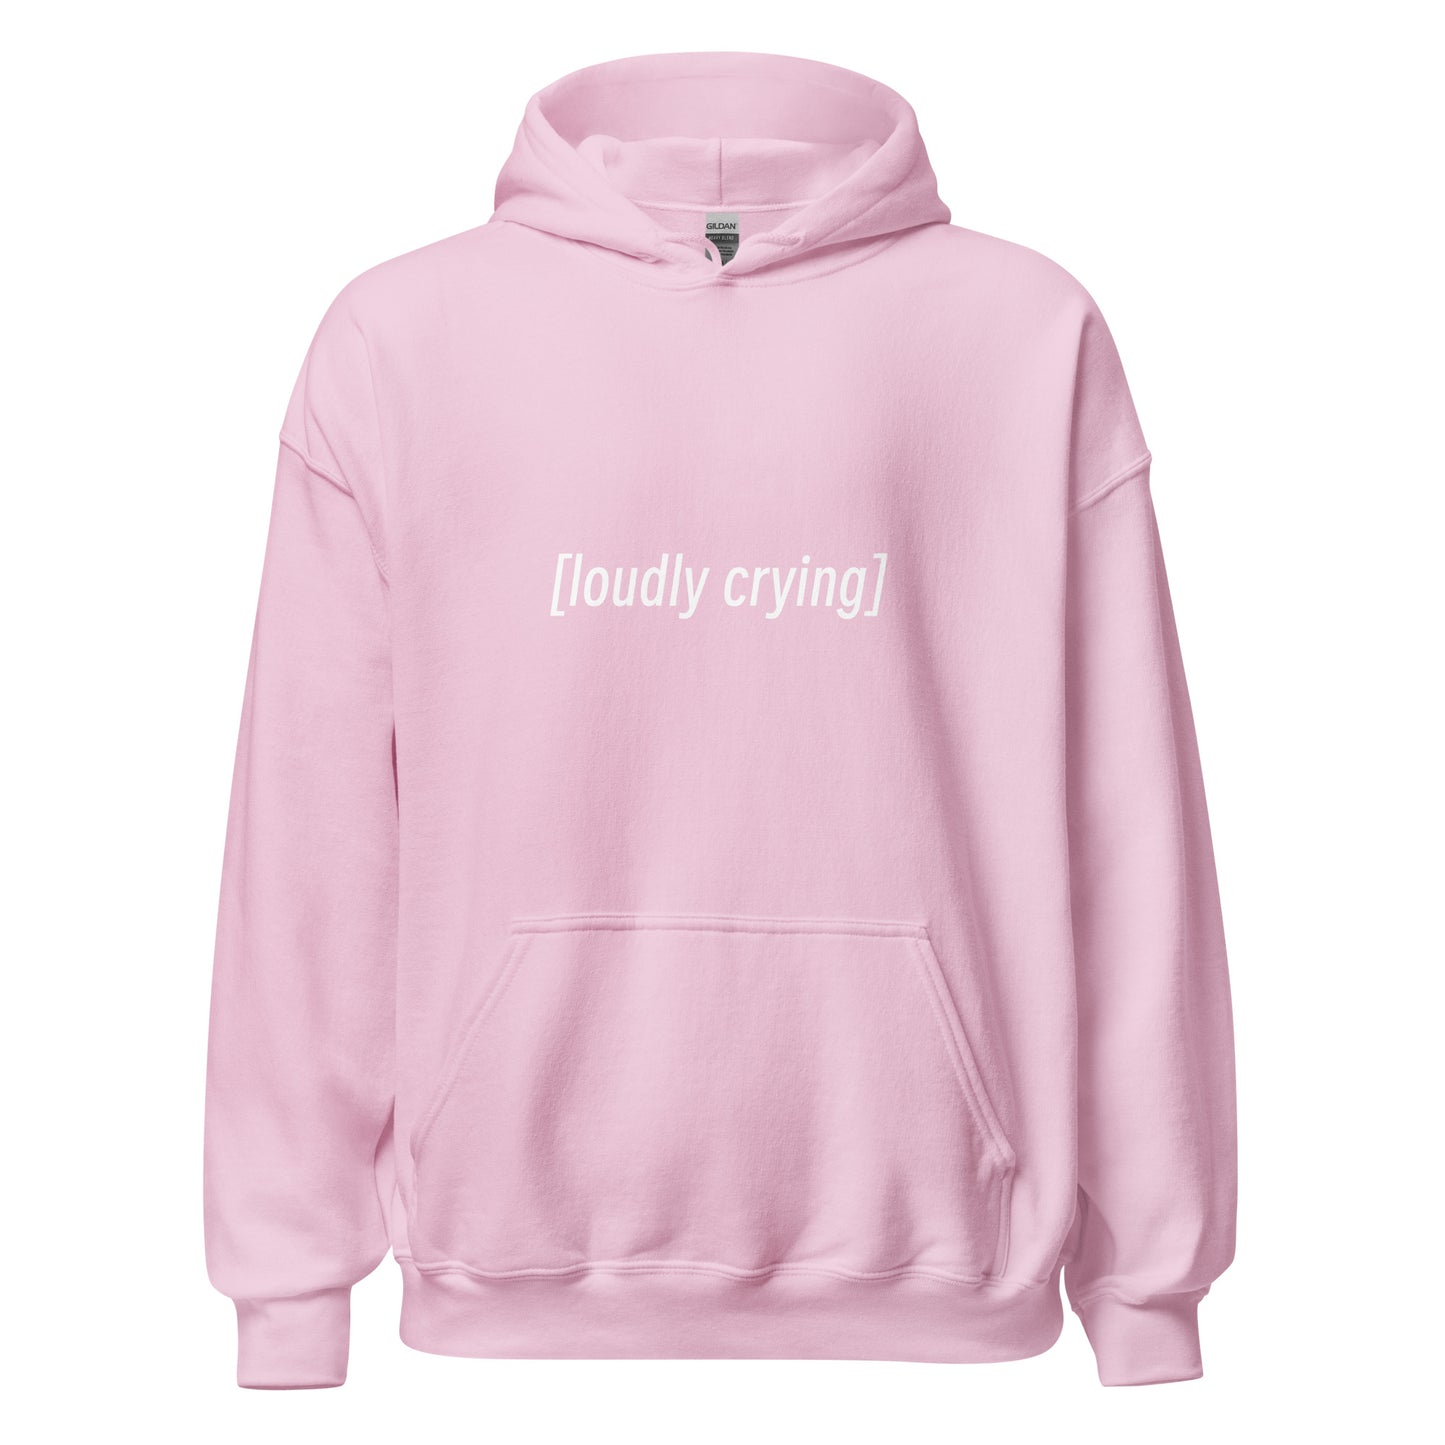 LOUDLY CRYING SUBTITLES Hoodie Pullover